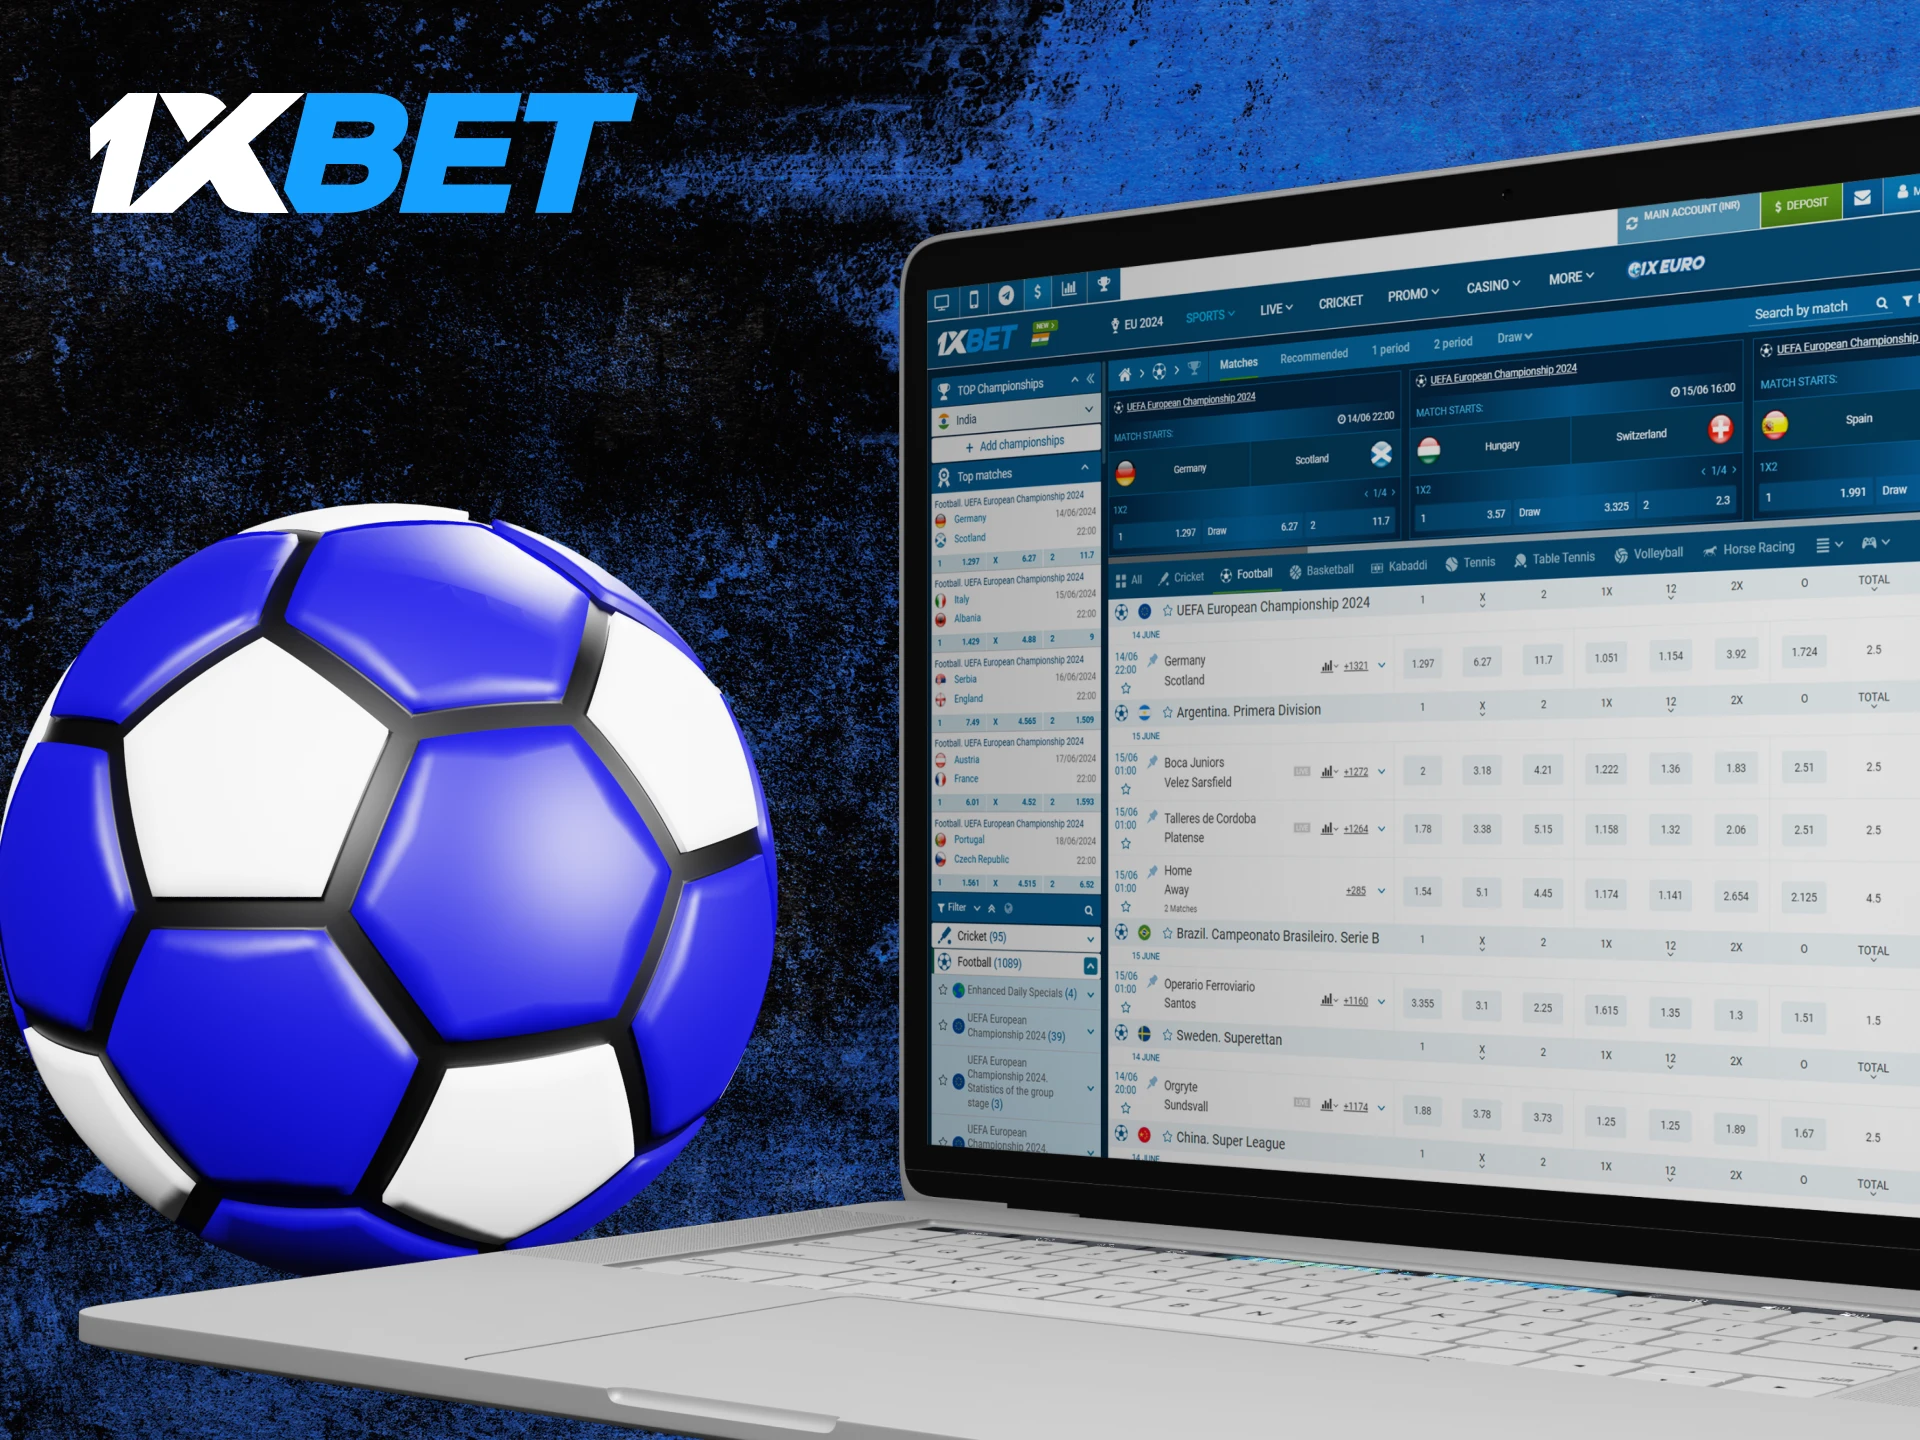 1xBet has a large football betting section with all football events.